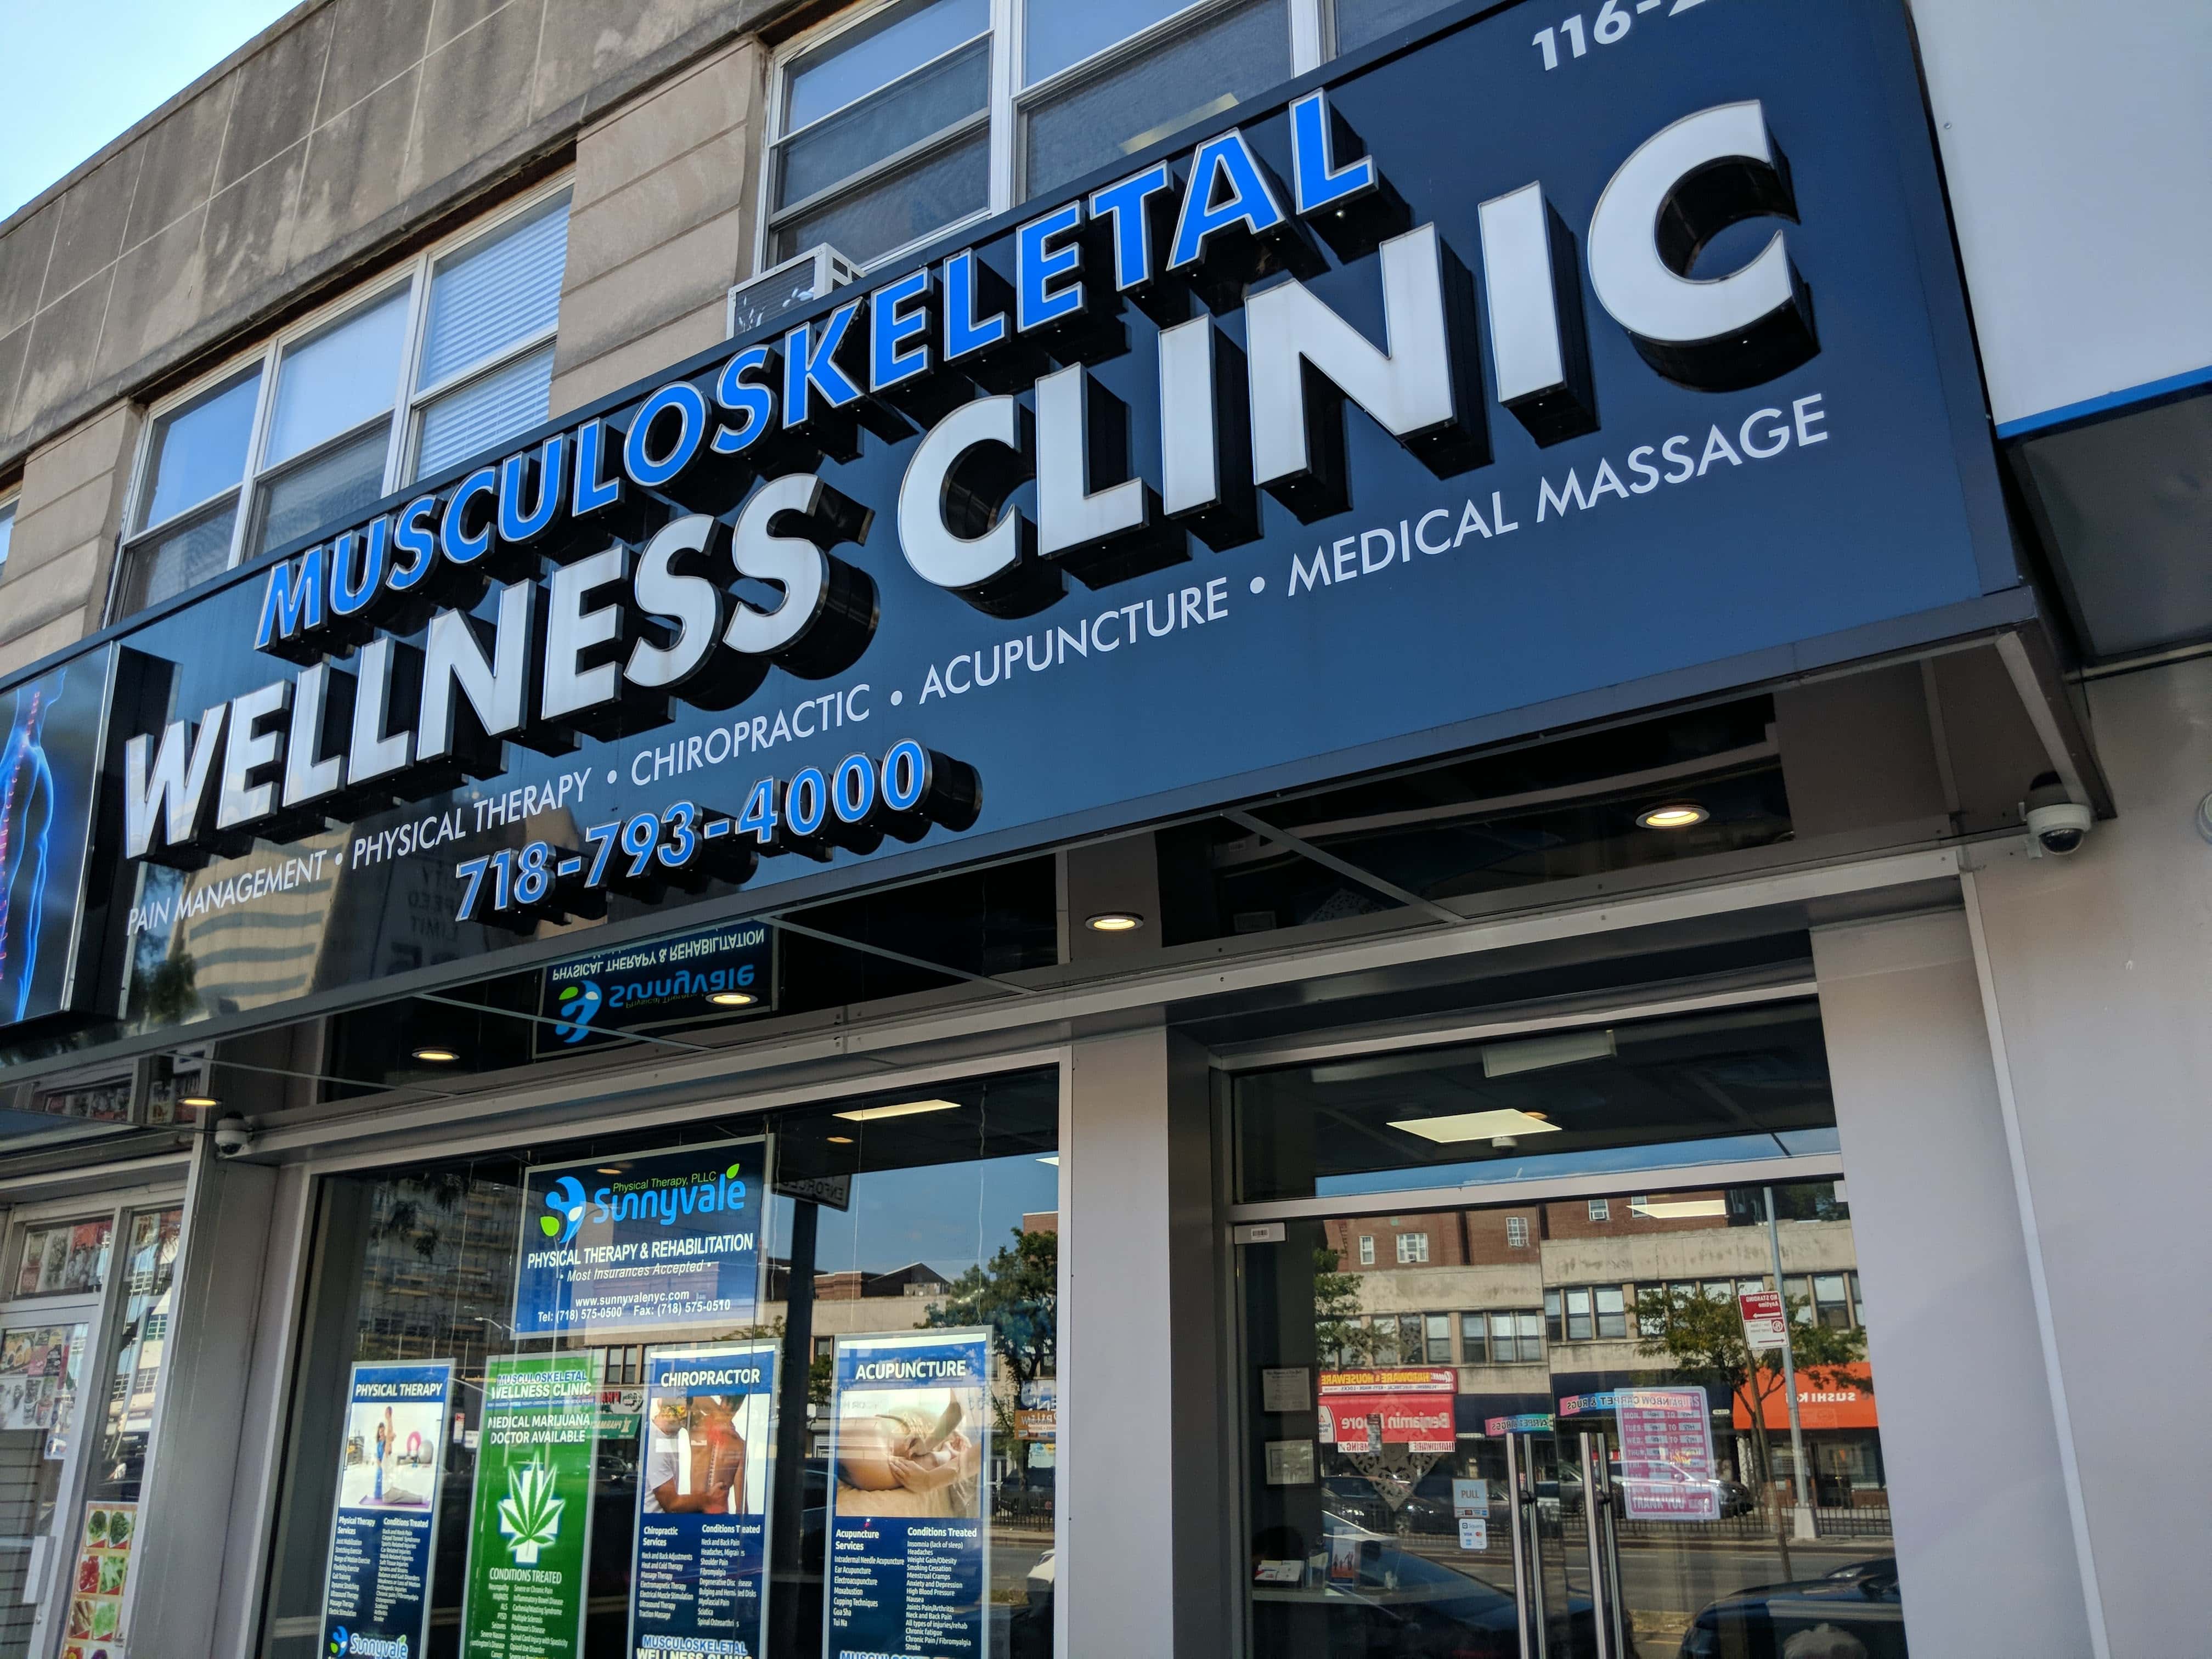 Musculoskeletal Wellness Clinic - Forest Hills, NY, US, gynecology